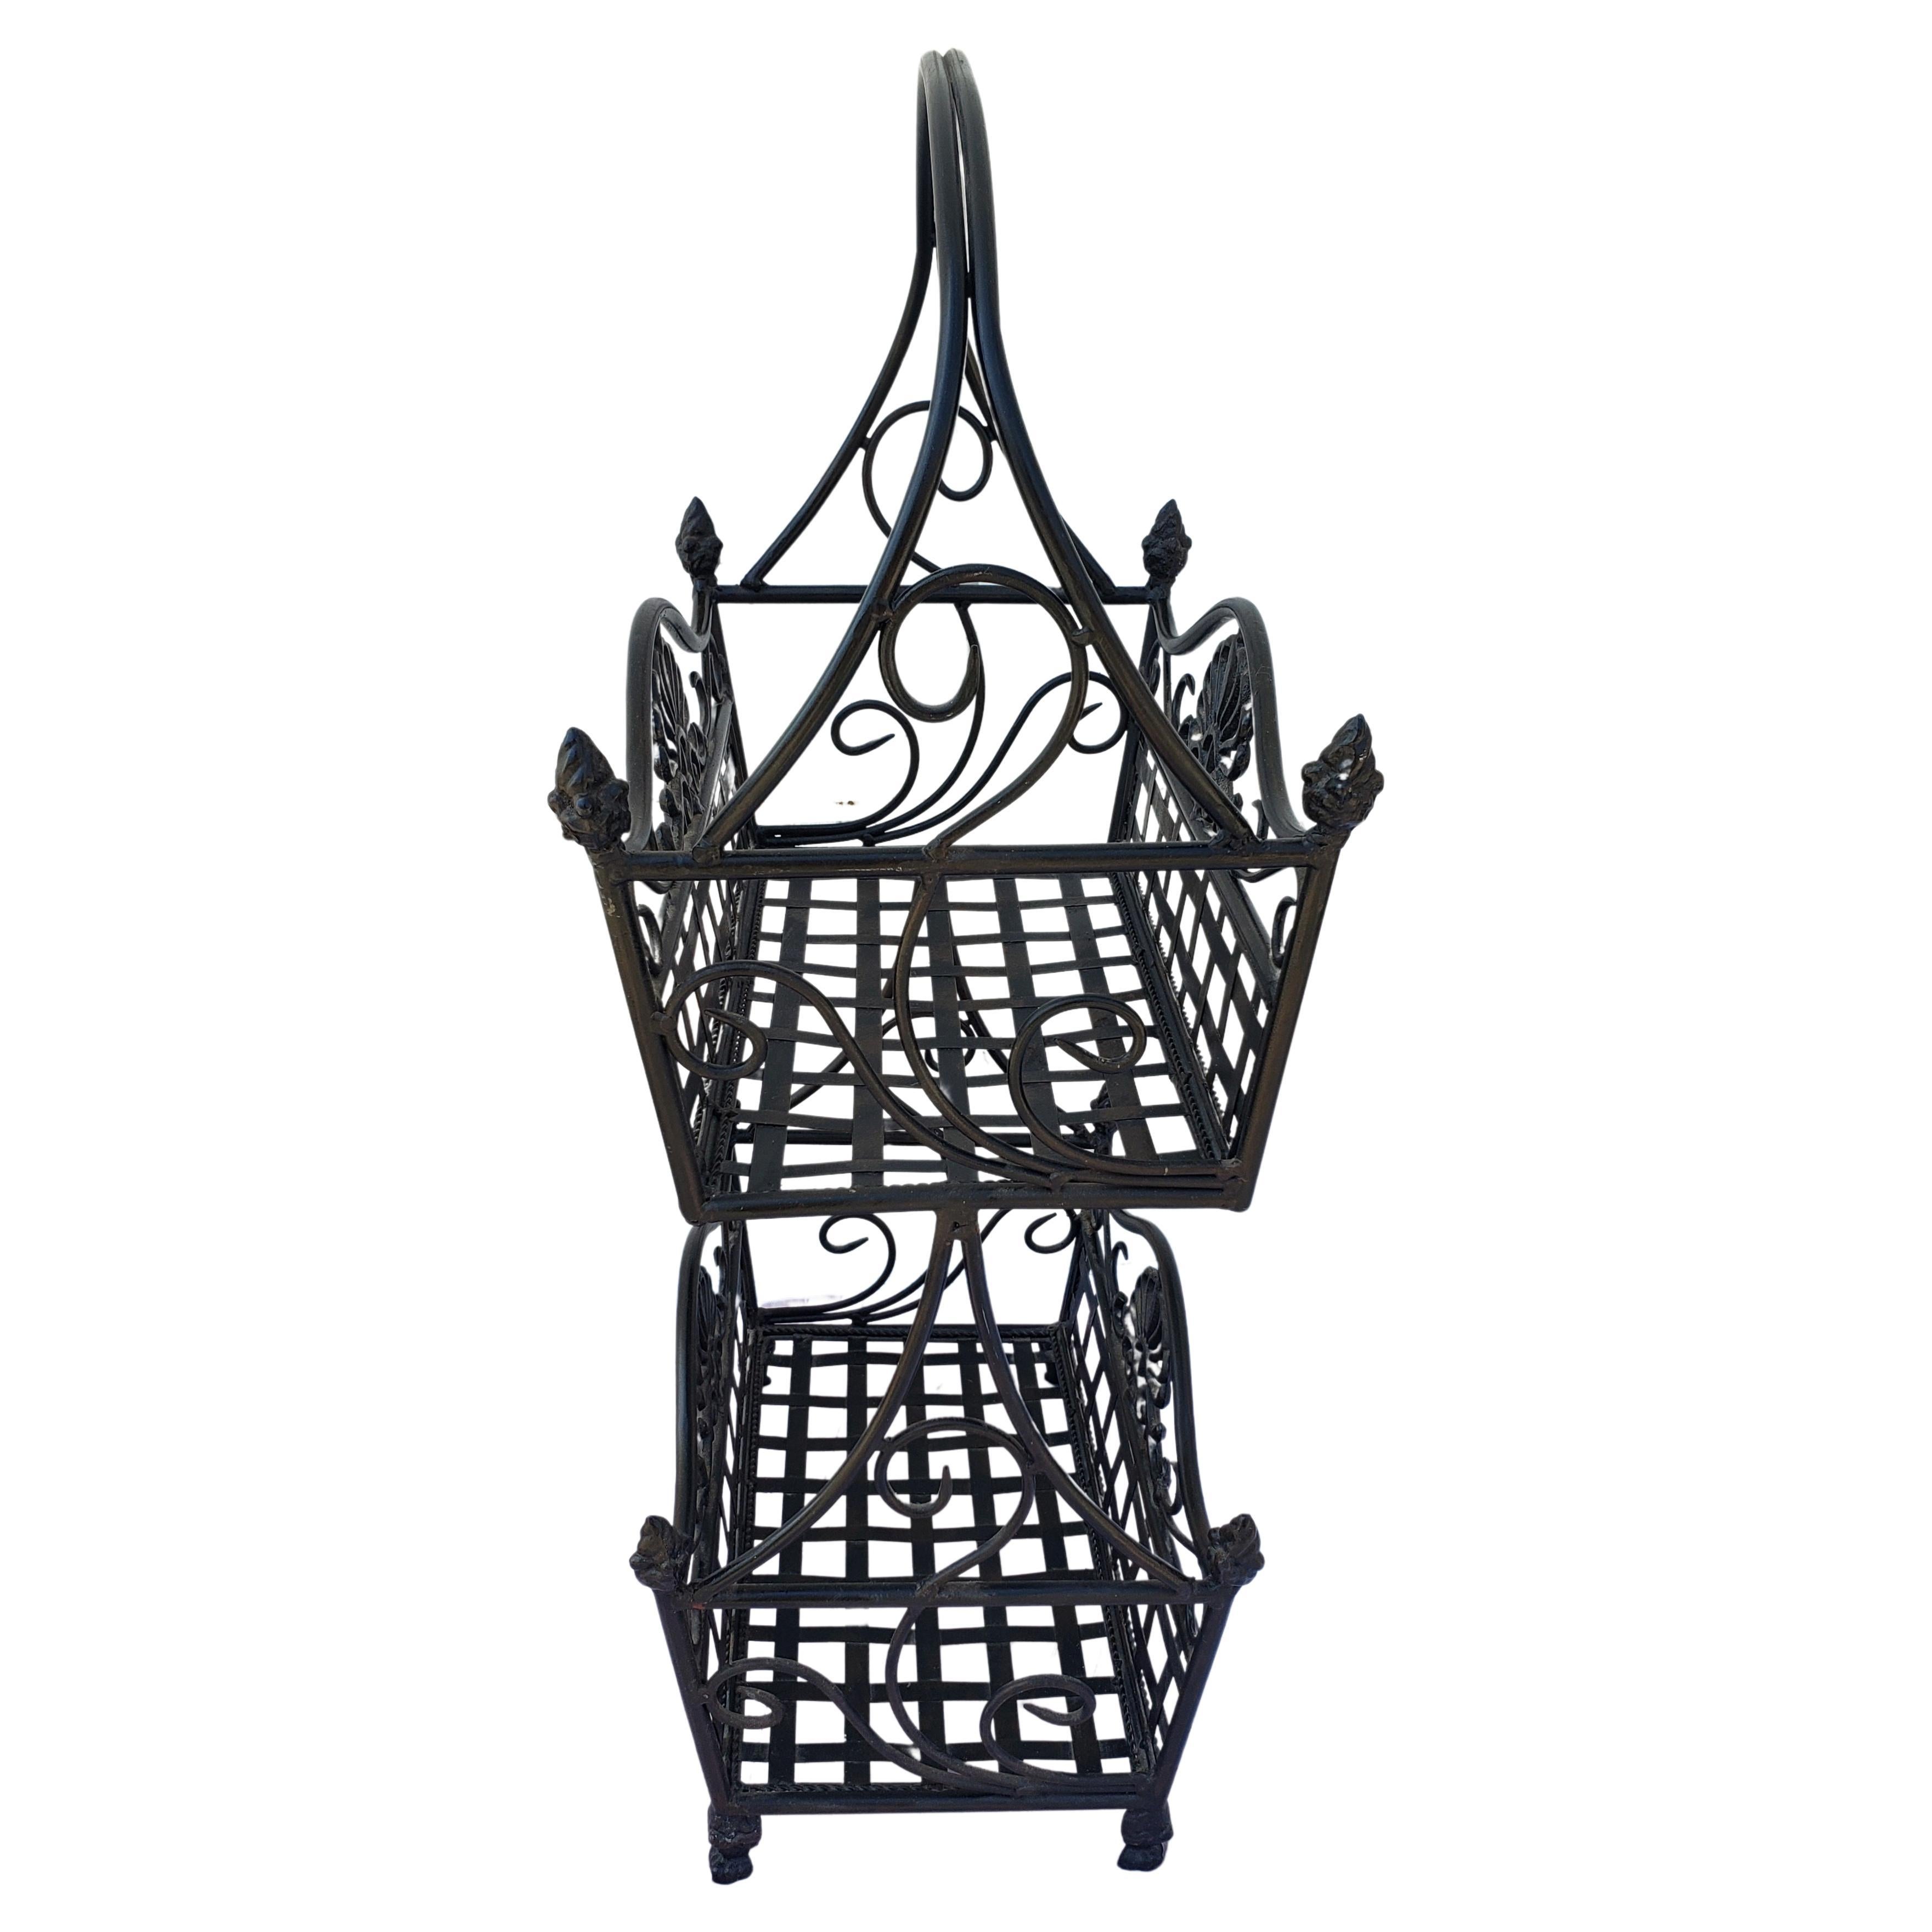 American Classical Antique Wrought Iron Two Tier Standing Basket For Sale